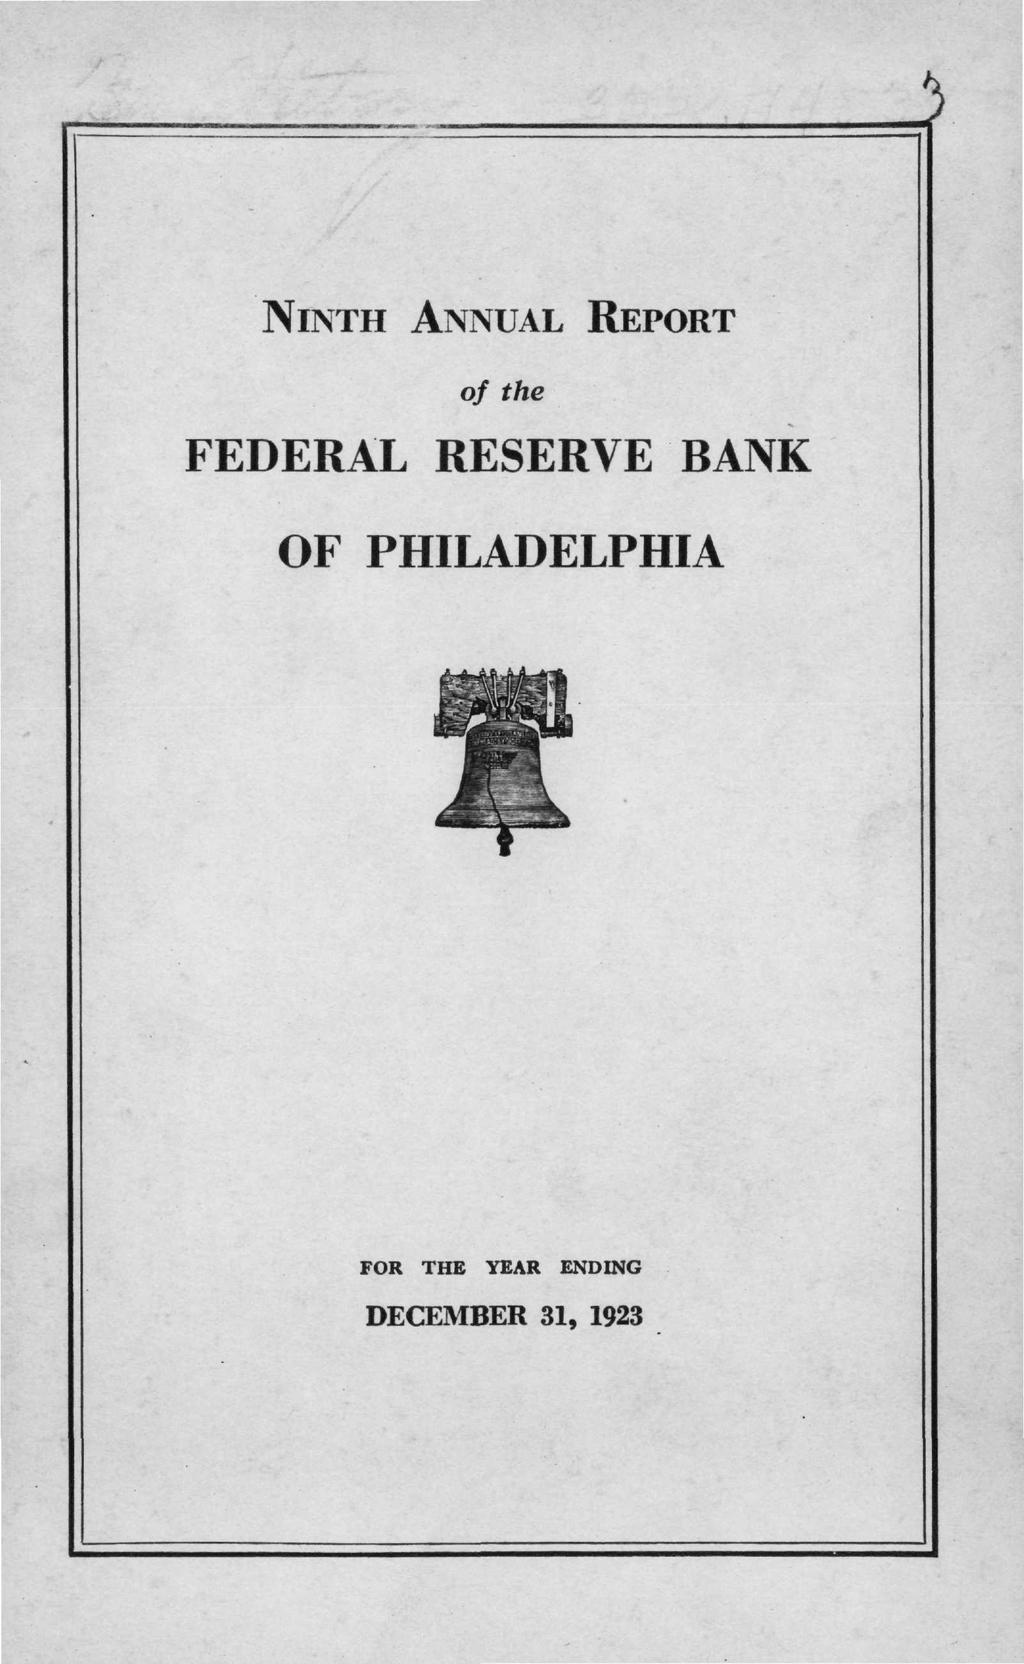 NINTH ANNUAL REPORT of the FEDERAL RESERVE BANK OF